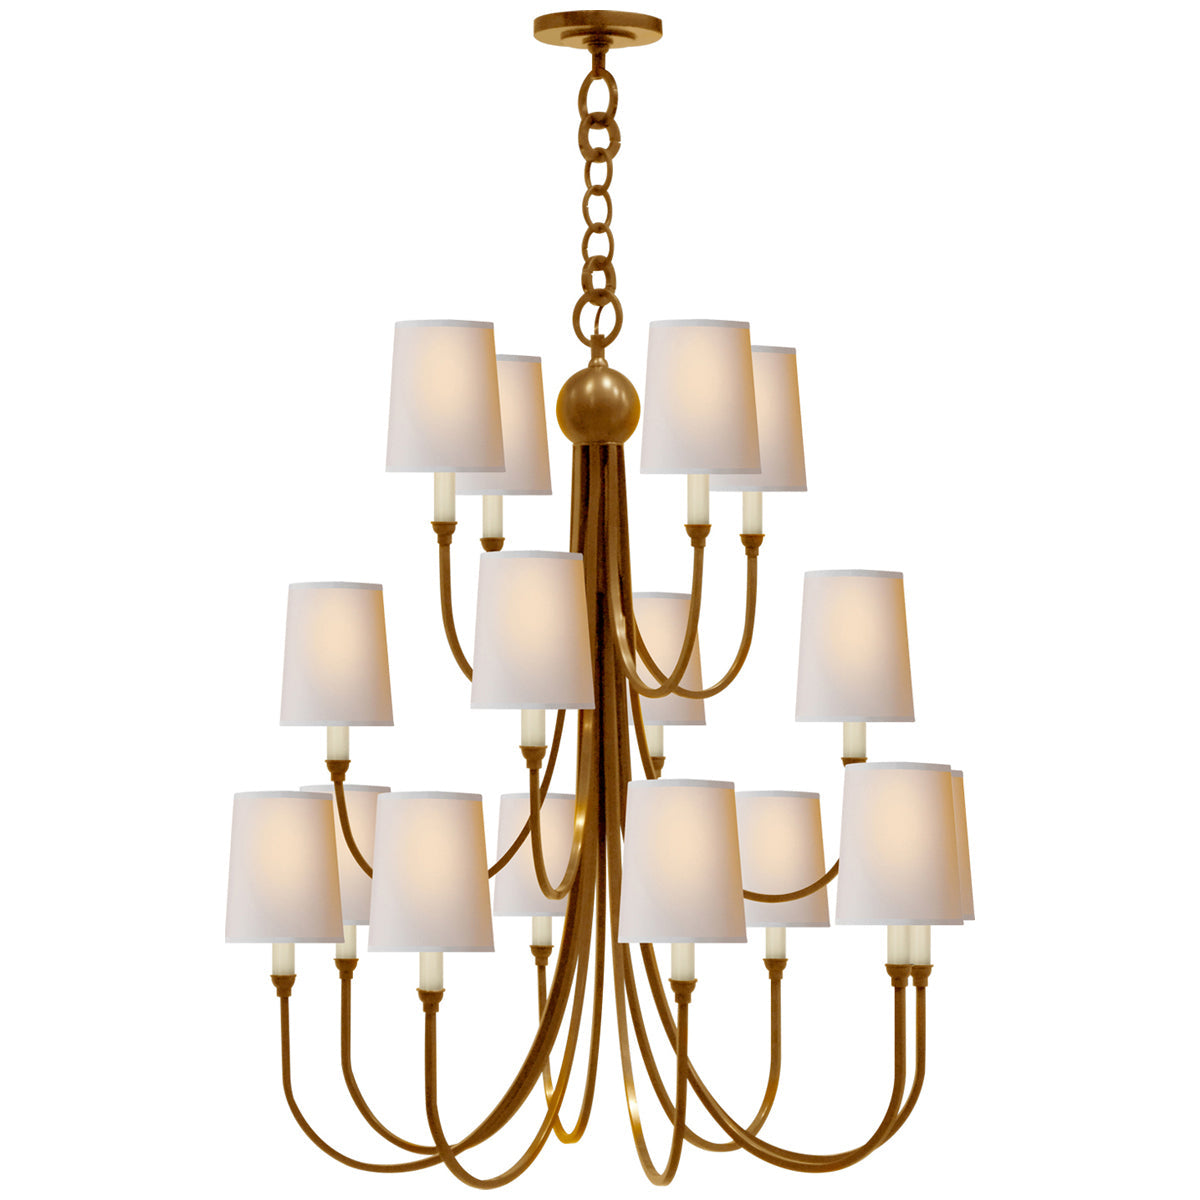 Visual Comfort Reed Extra Large Chandelier